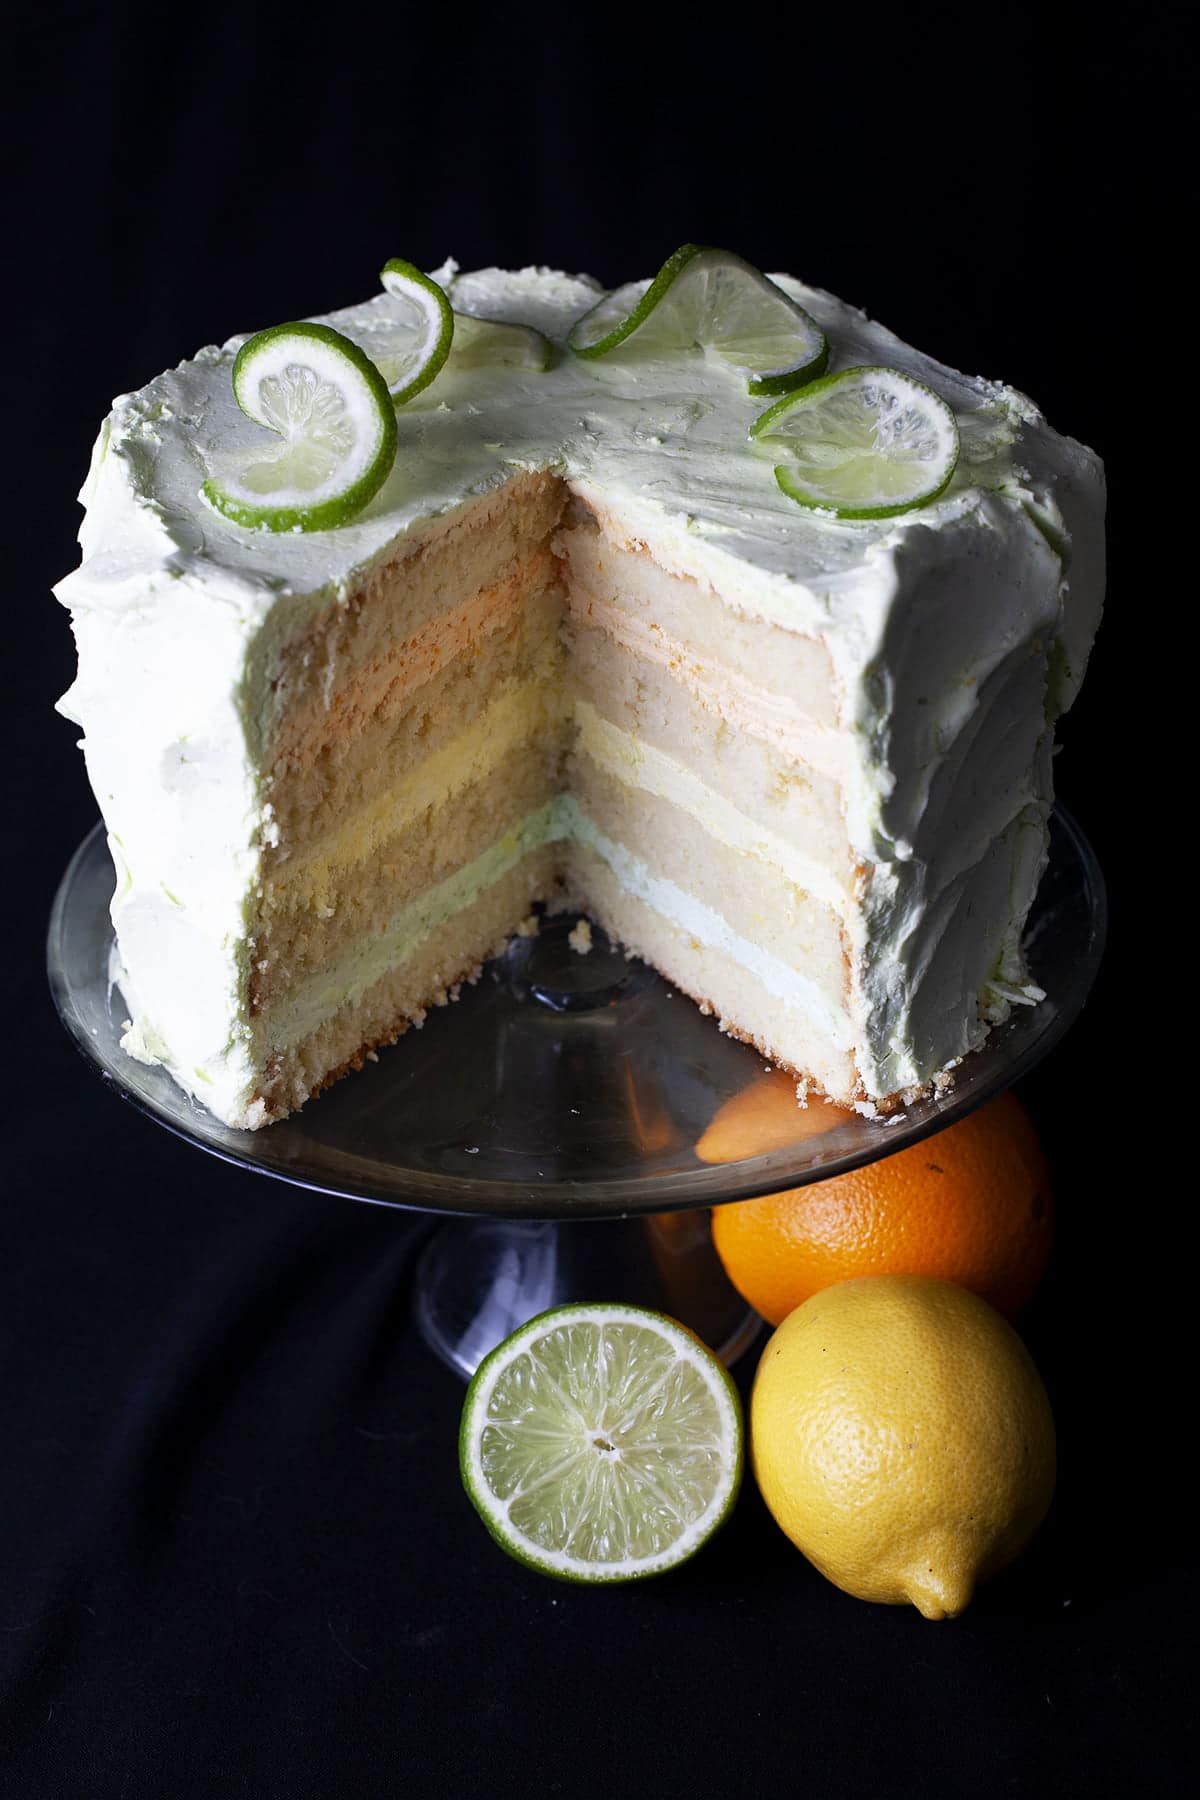 A sliced into citrus splendor cake is shown on a raised plate, with an orange, lemon, and half a lime sitting at the base of the cake stand.